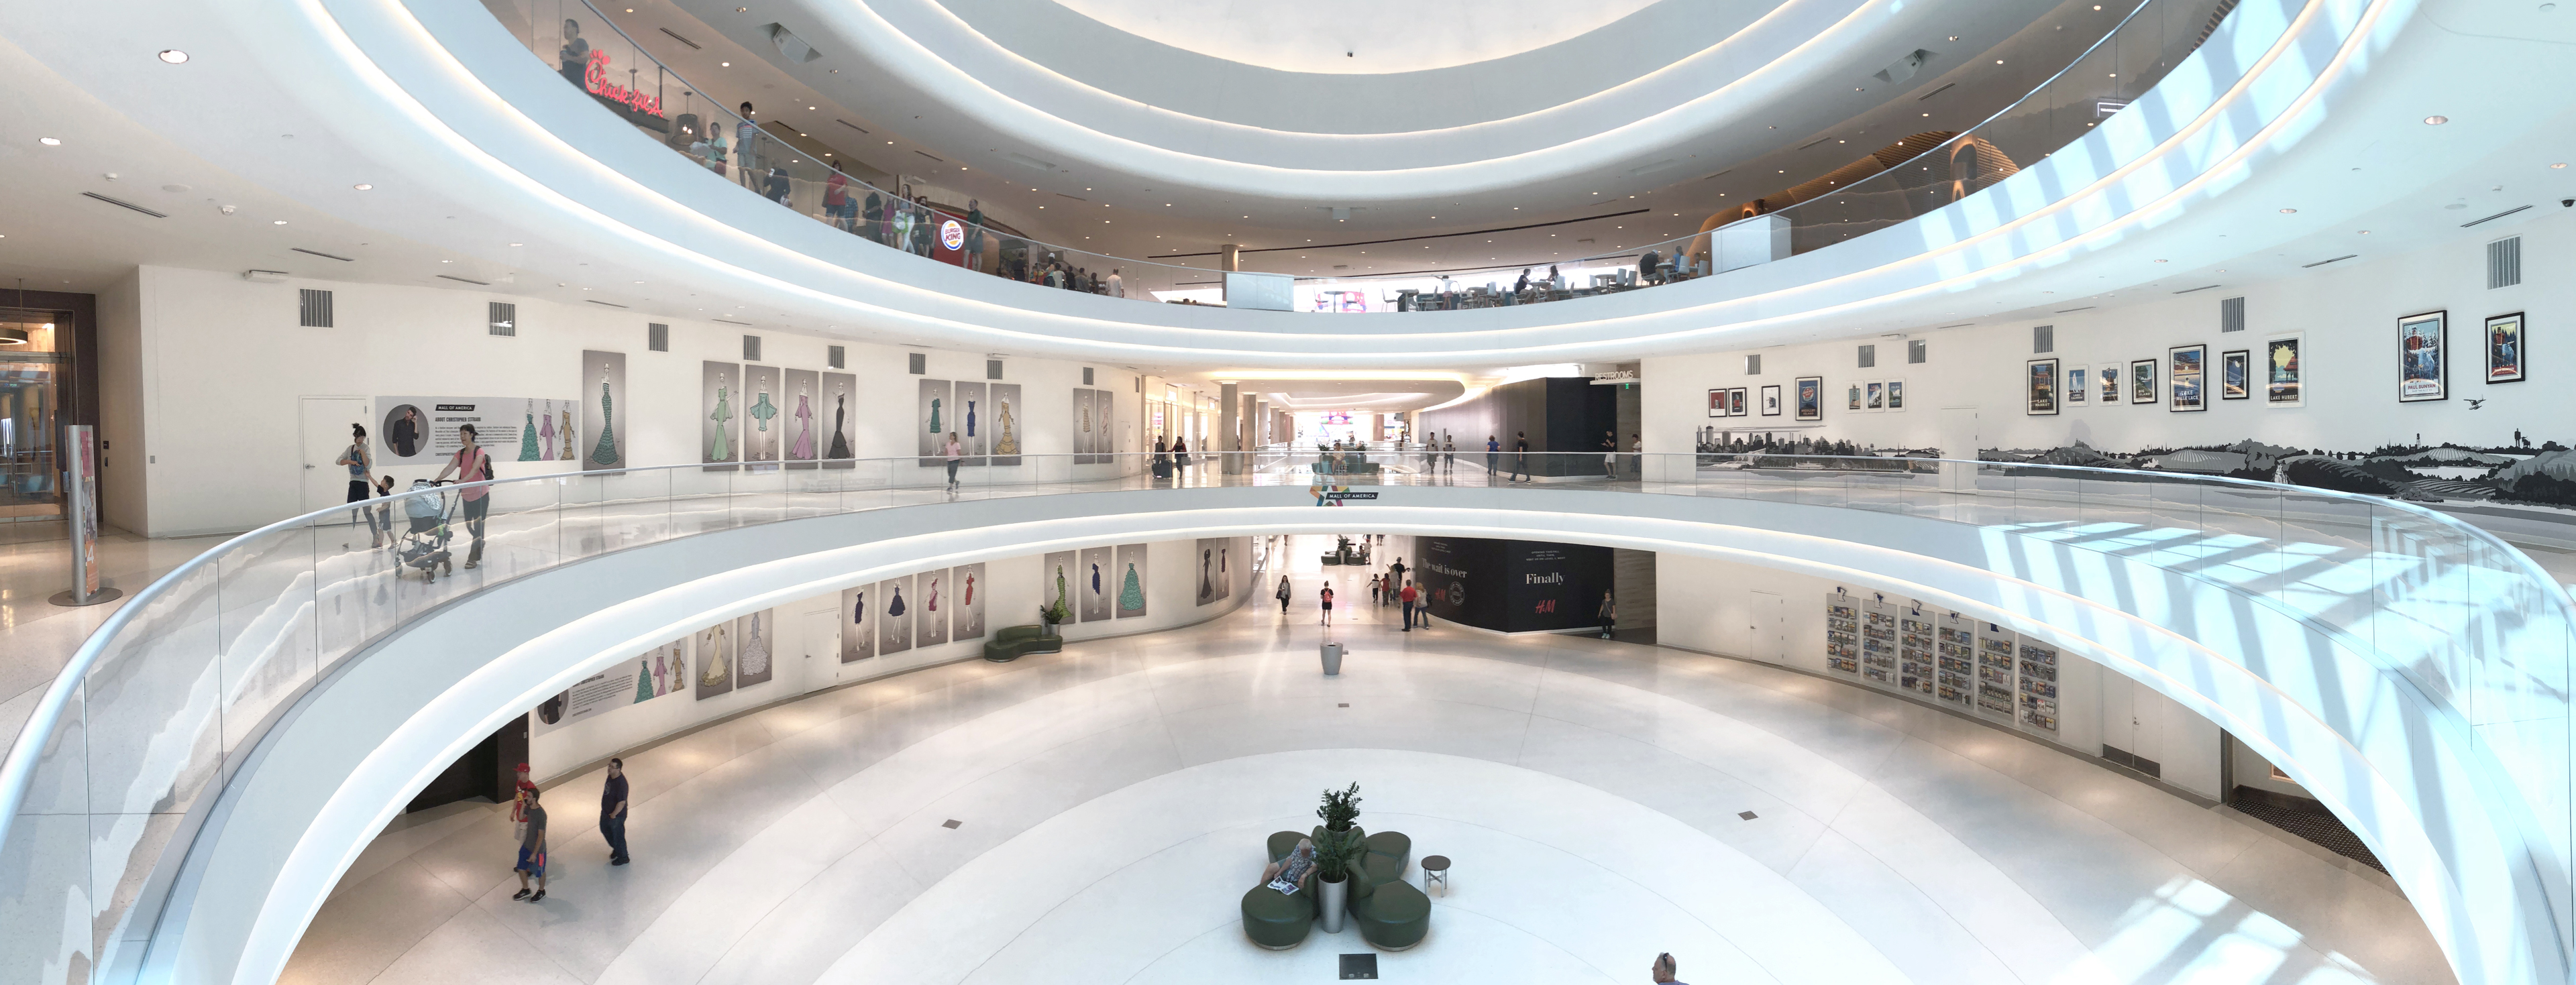 Concept: Reimagining Apple&#39;s Mall of America retail store - 9to5Mac